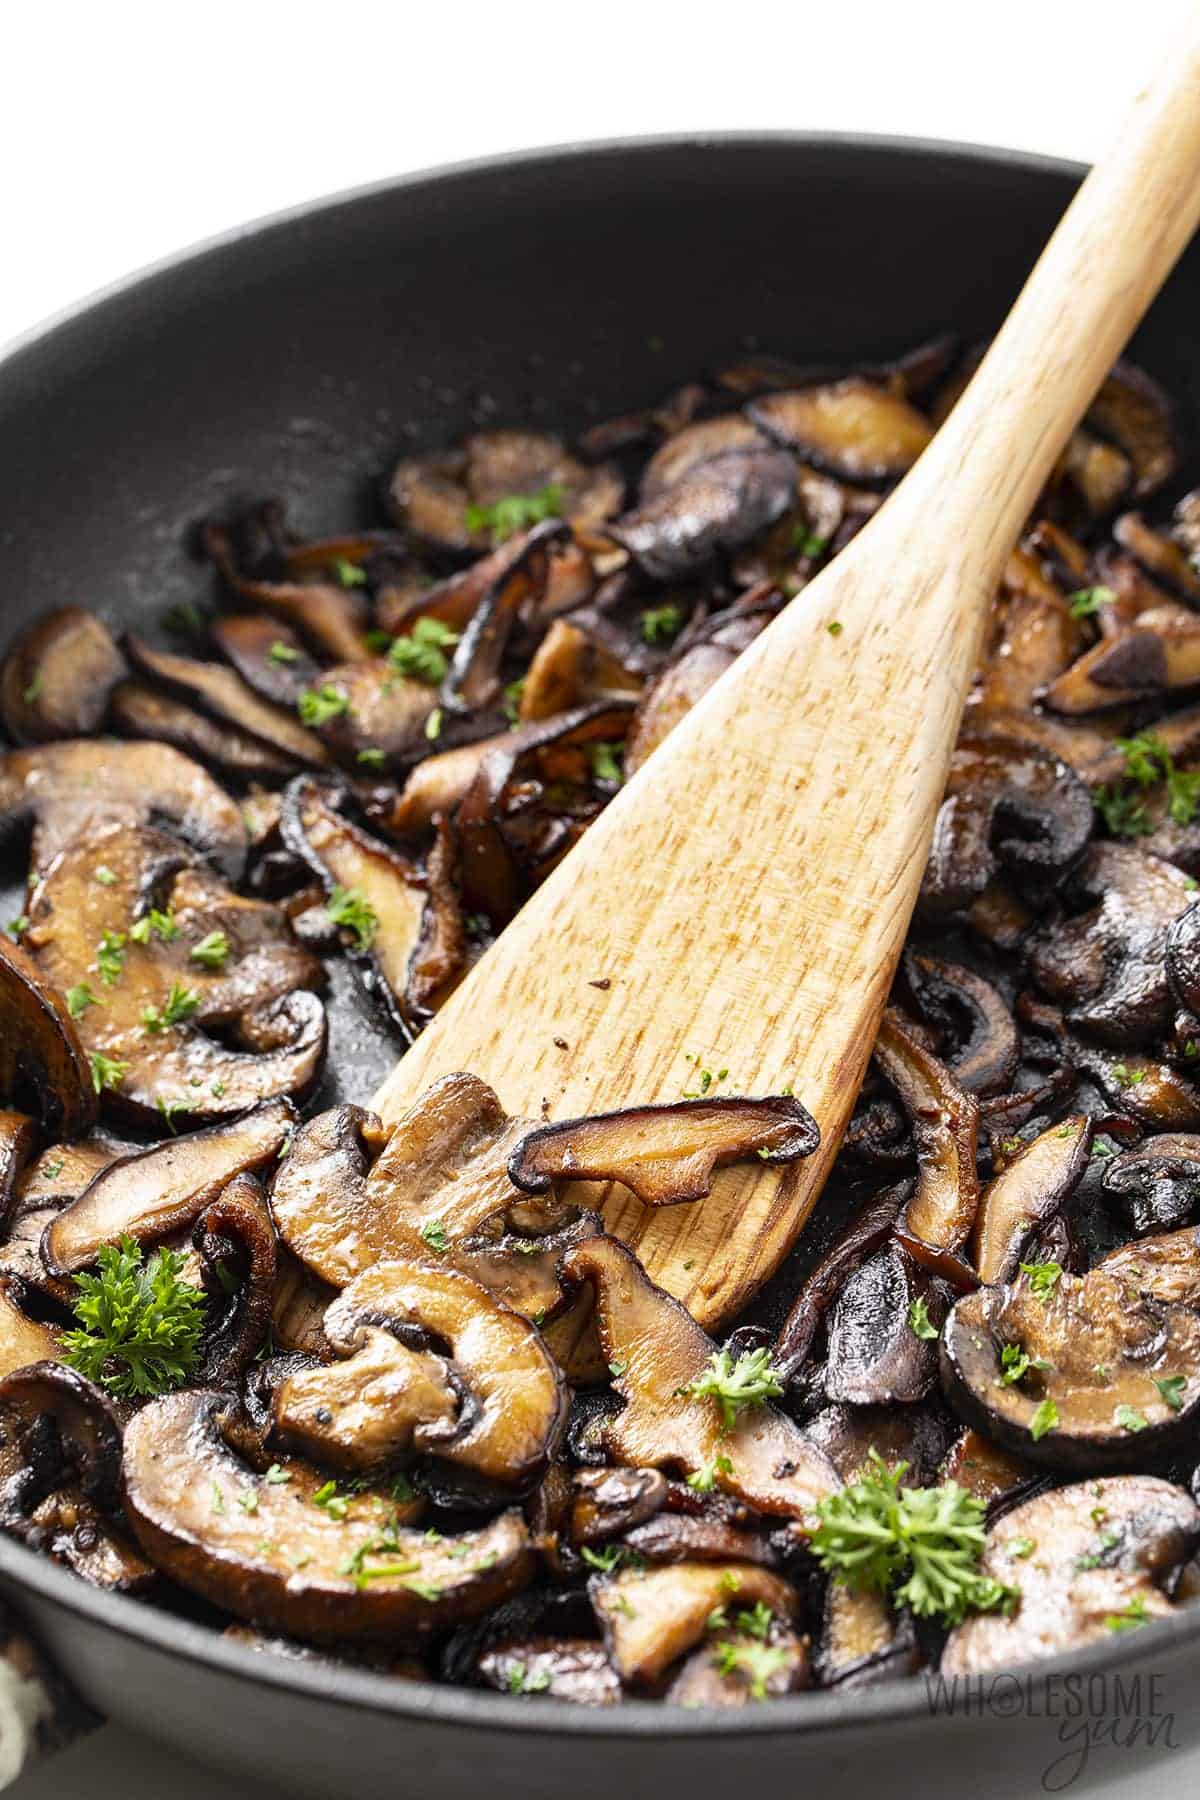 Garlic butter mushrooms in a skillet with wooden spatula.